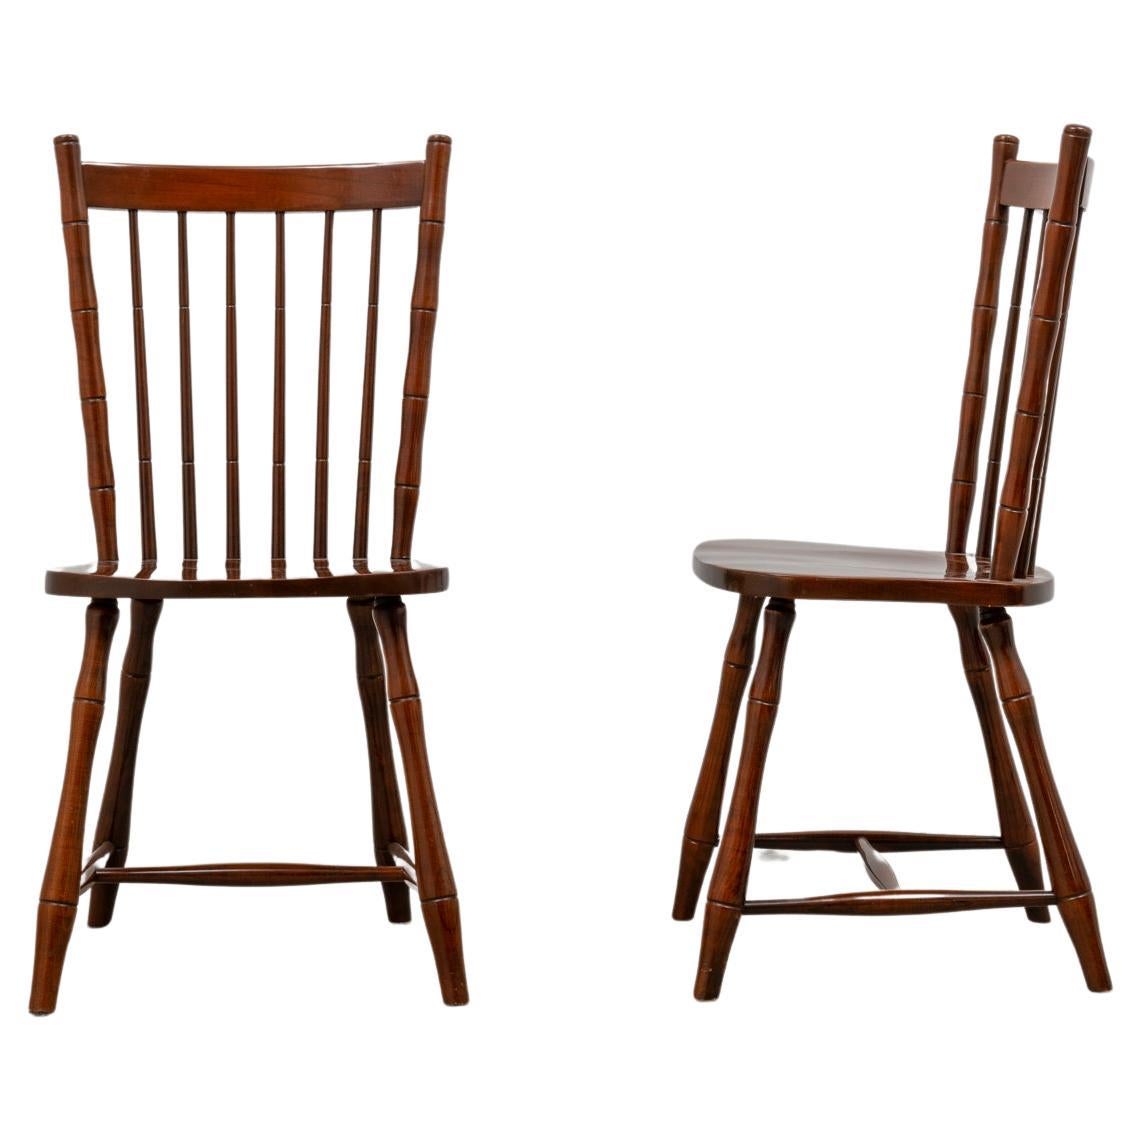  Pair of Cherry Wood Chairs by Pennsylvania House edited by Fantoni, 1970s For Sale